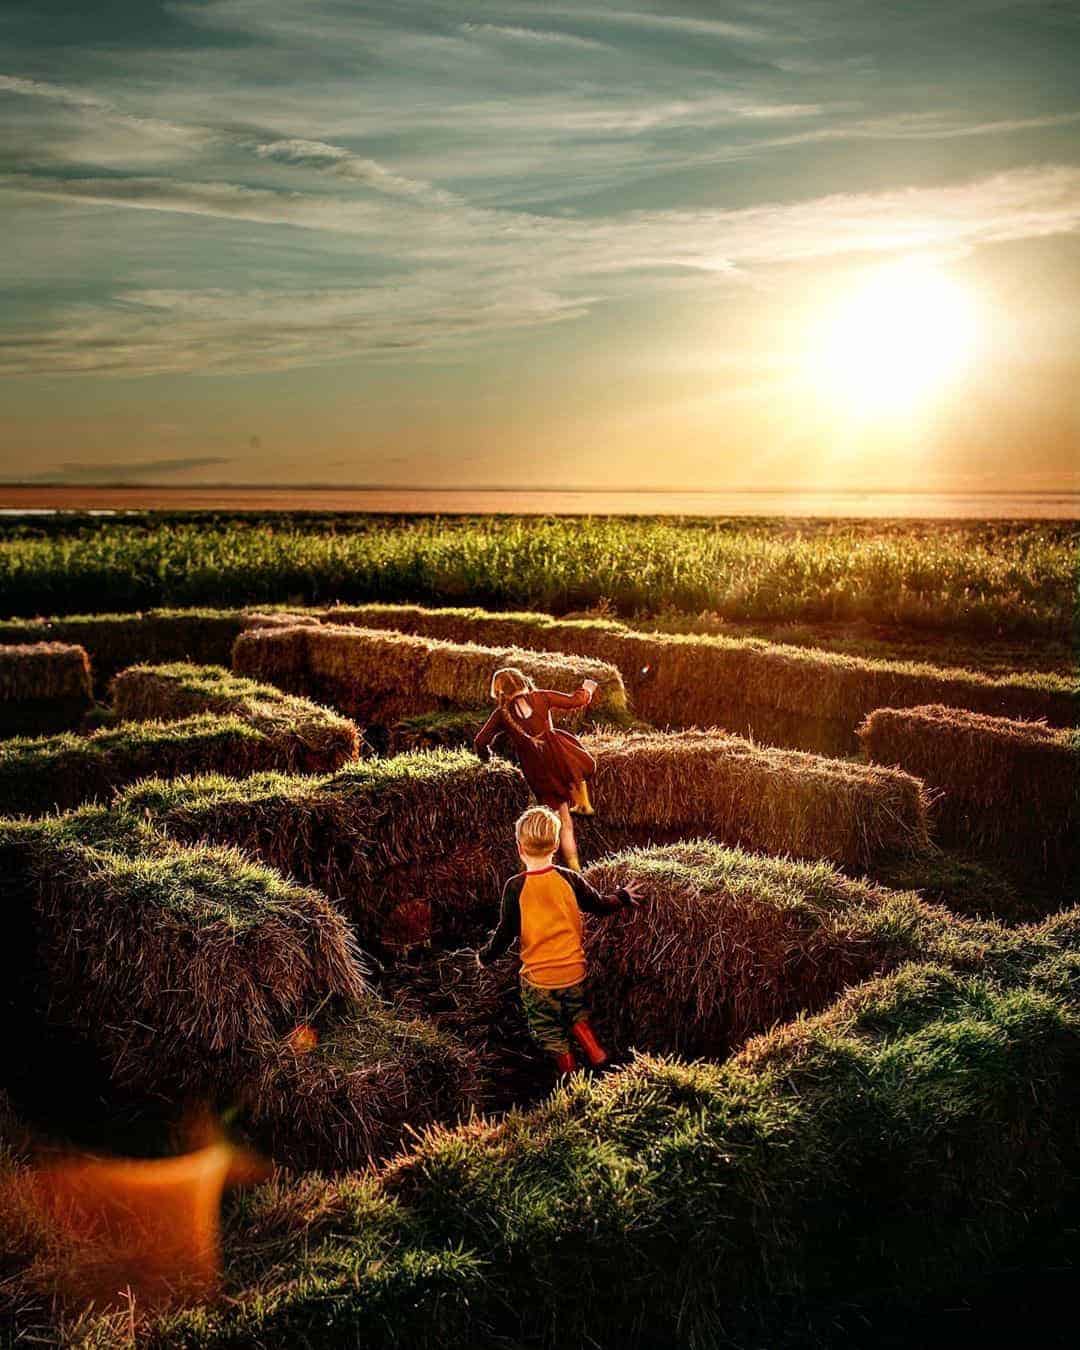 outdoor fall activities & ideas for kids - get lost in a corn maze